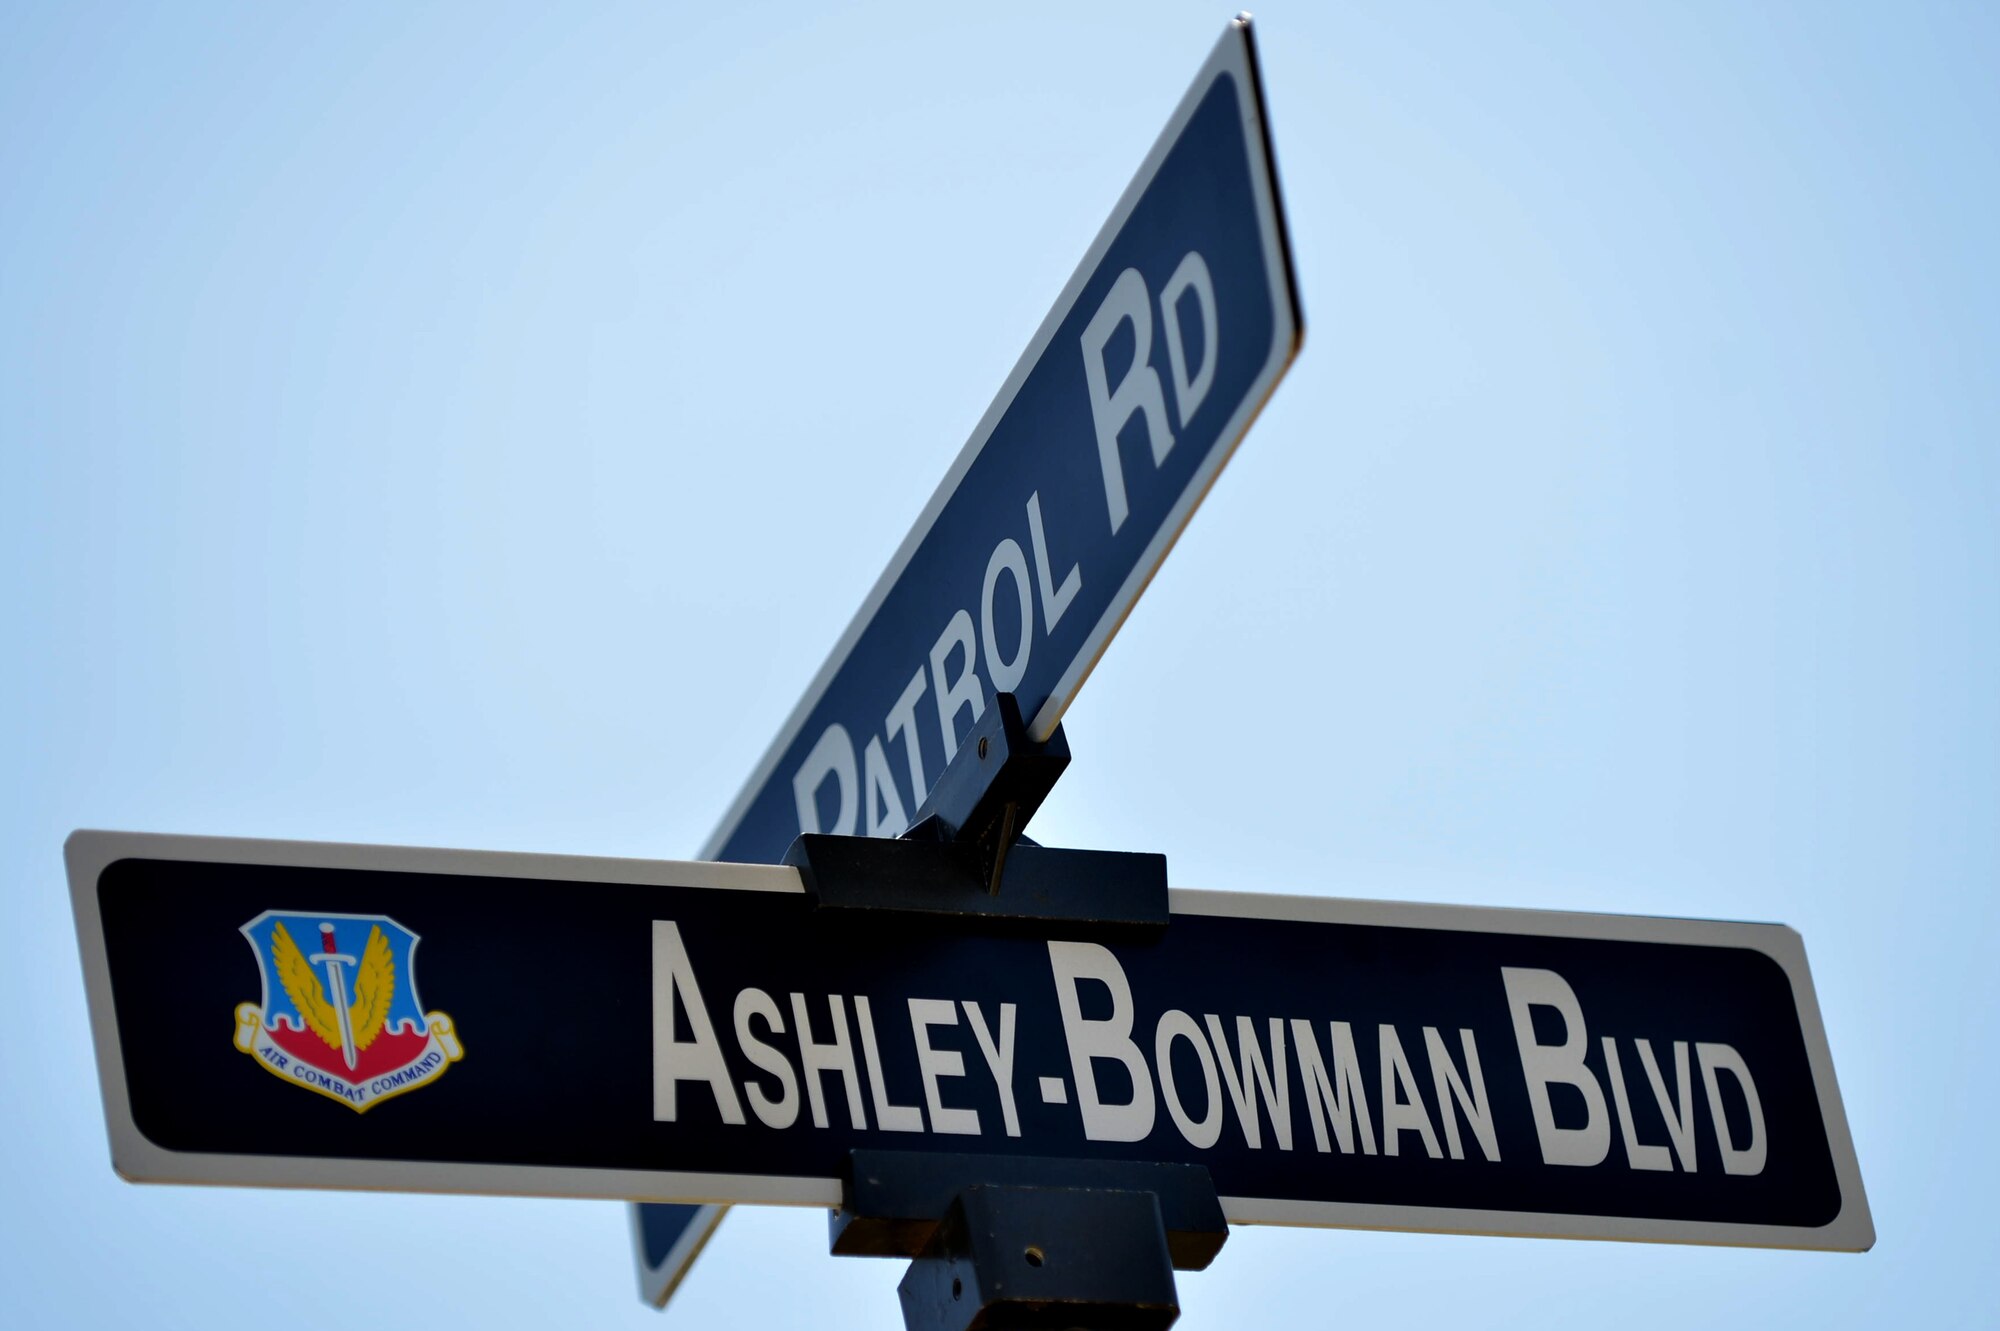 The Ashley-Bowman Boulevard sign is unveiled near the Sumter Gate after the road naming ceremony on Shaw Air Force Base, S.C., July 14, 2016. The road is named after Lt. Col. Willie Ashley and 1st Lt. Leroy Bowman, both Sumter, S.C. natives who served in the Army Air Corps as Tuskegee Airmen during World War II. (U.S. Air Force photo by Senior Airman Michael Cossaboom)